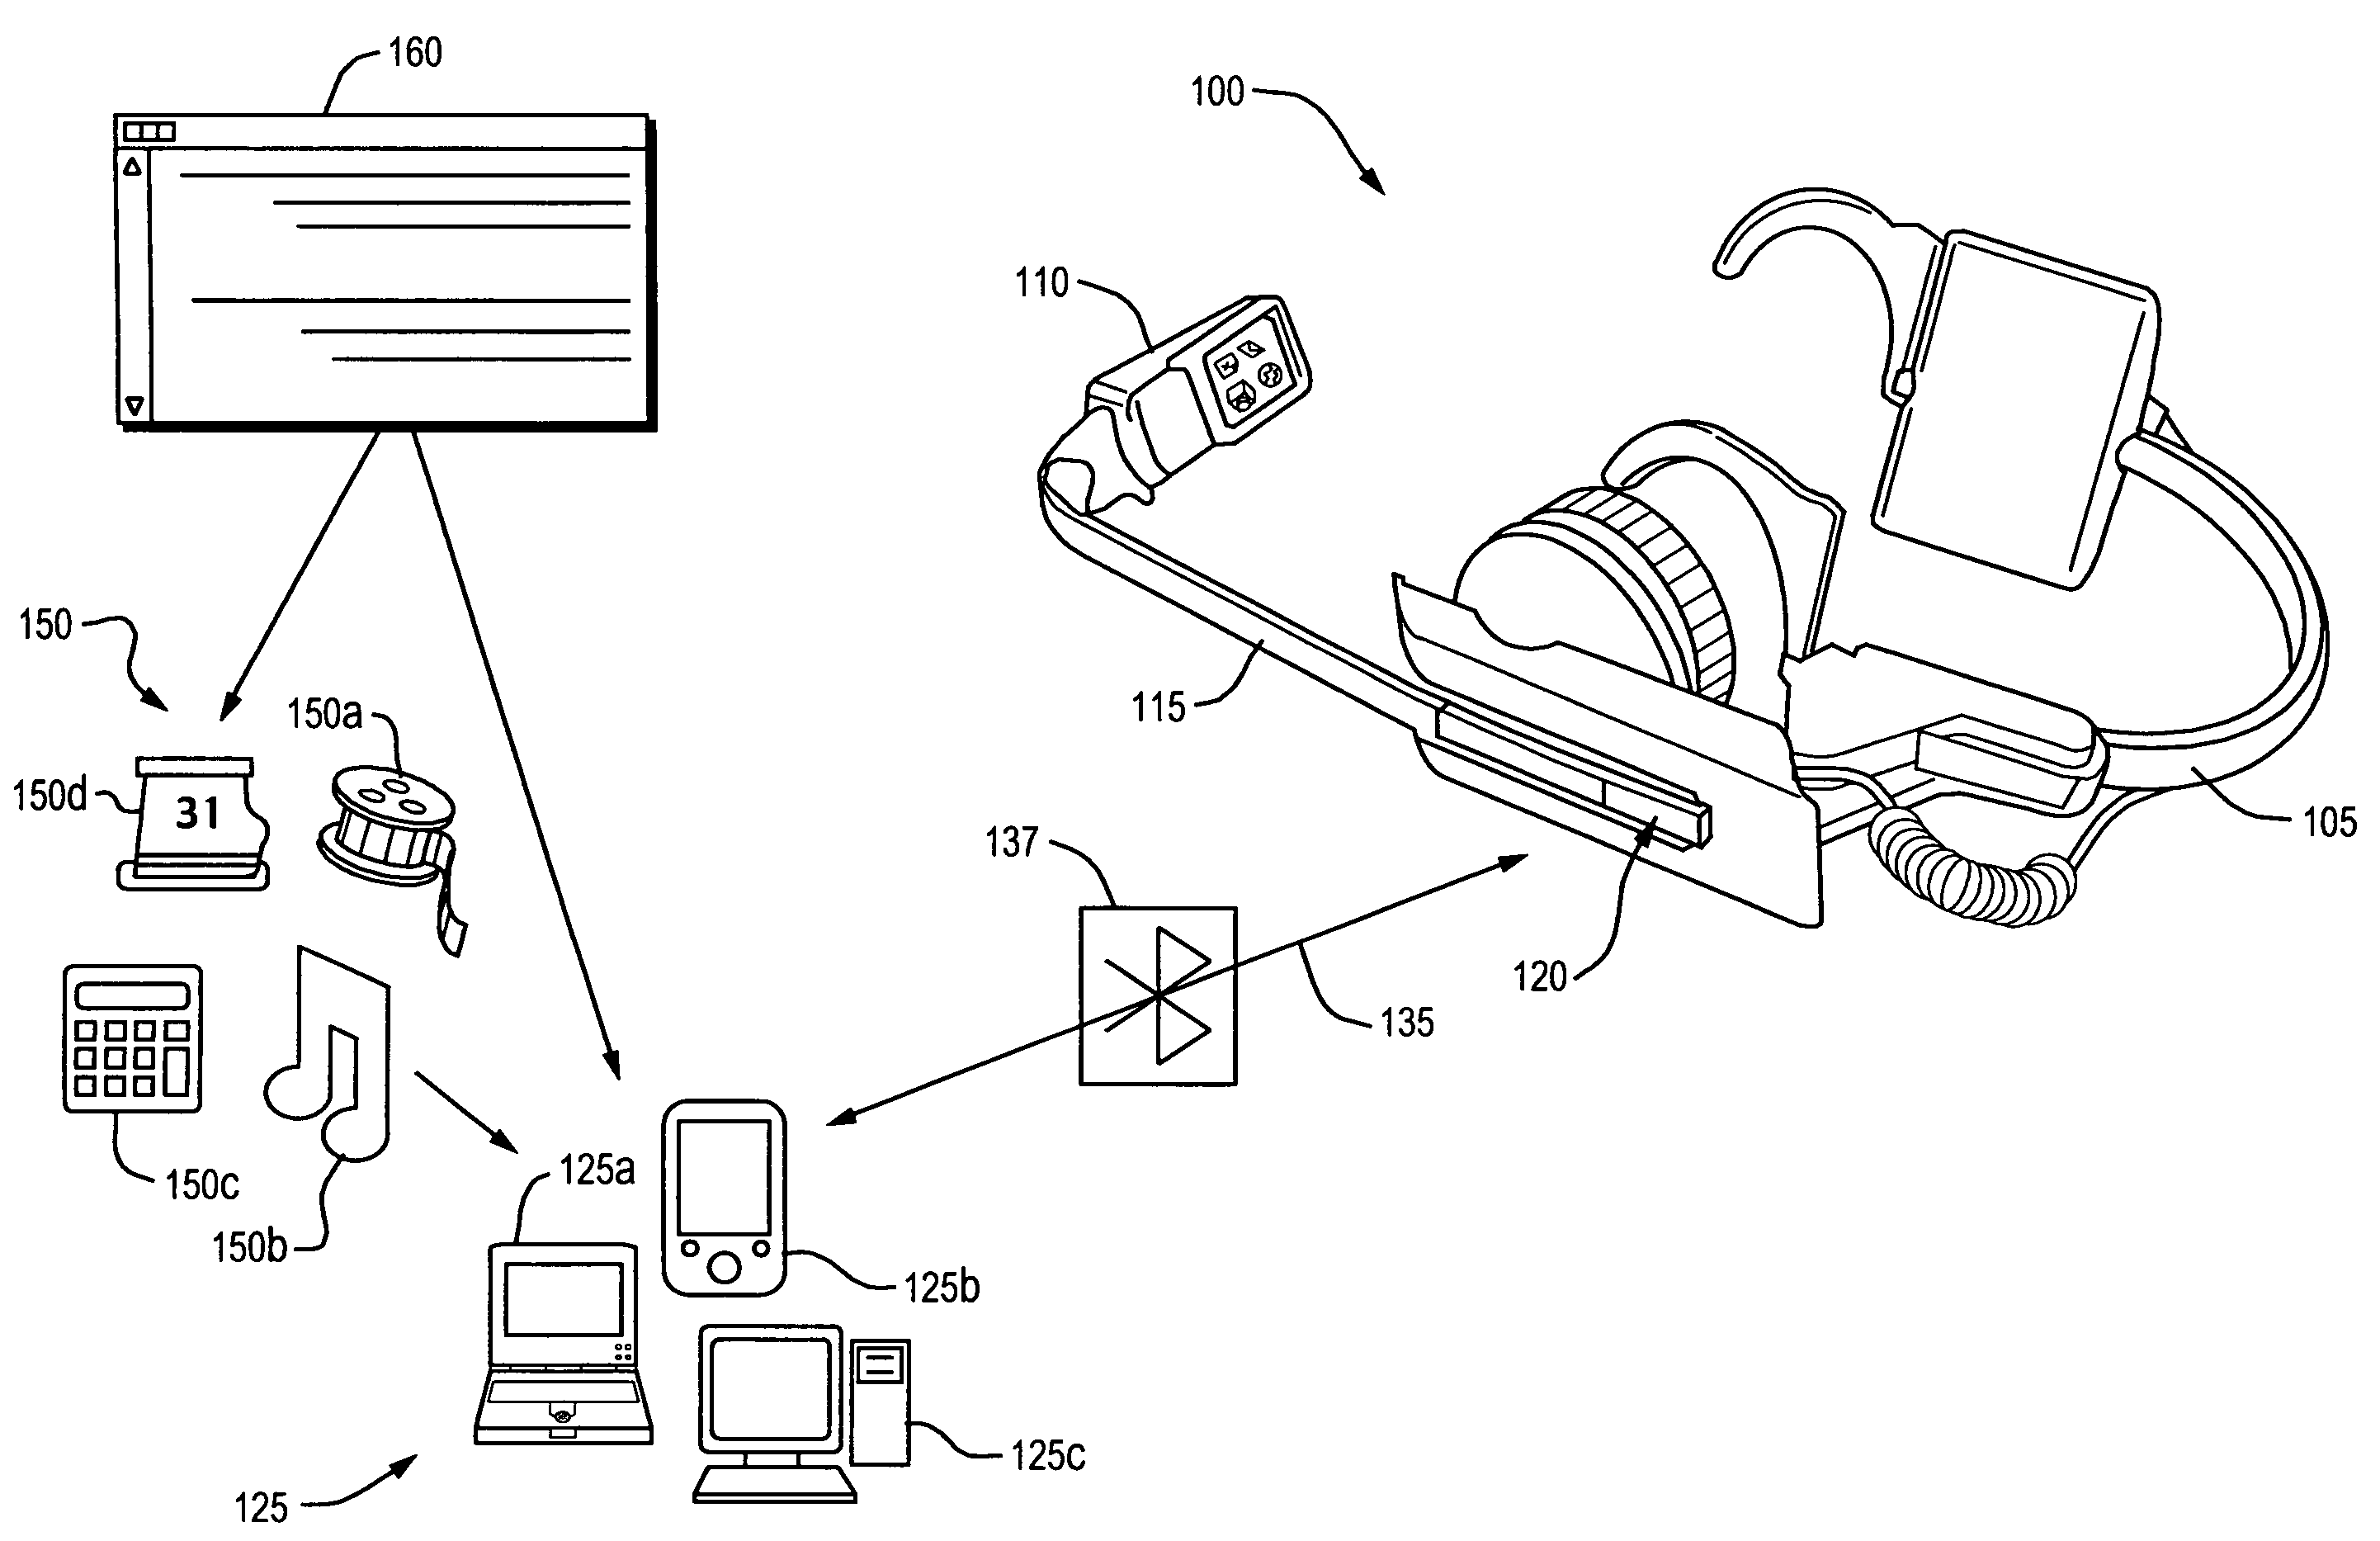 Mobile wireless display software platform for controlling other systems and devices